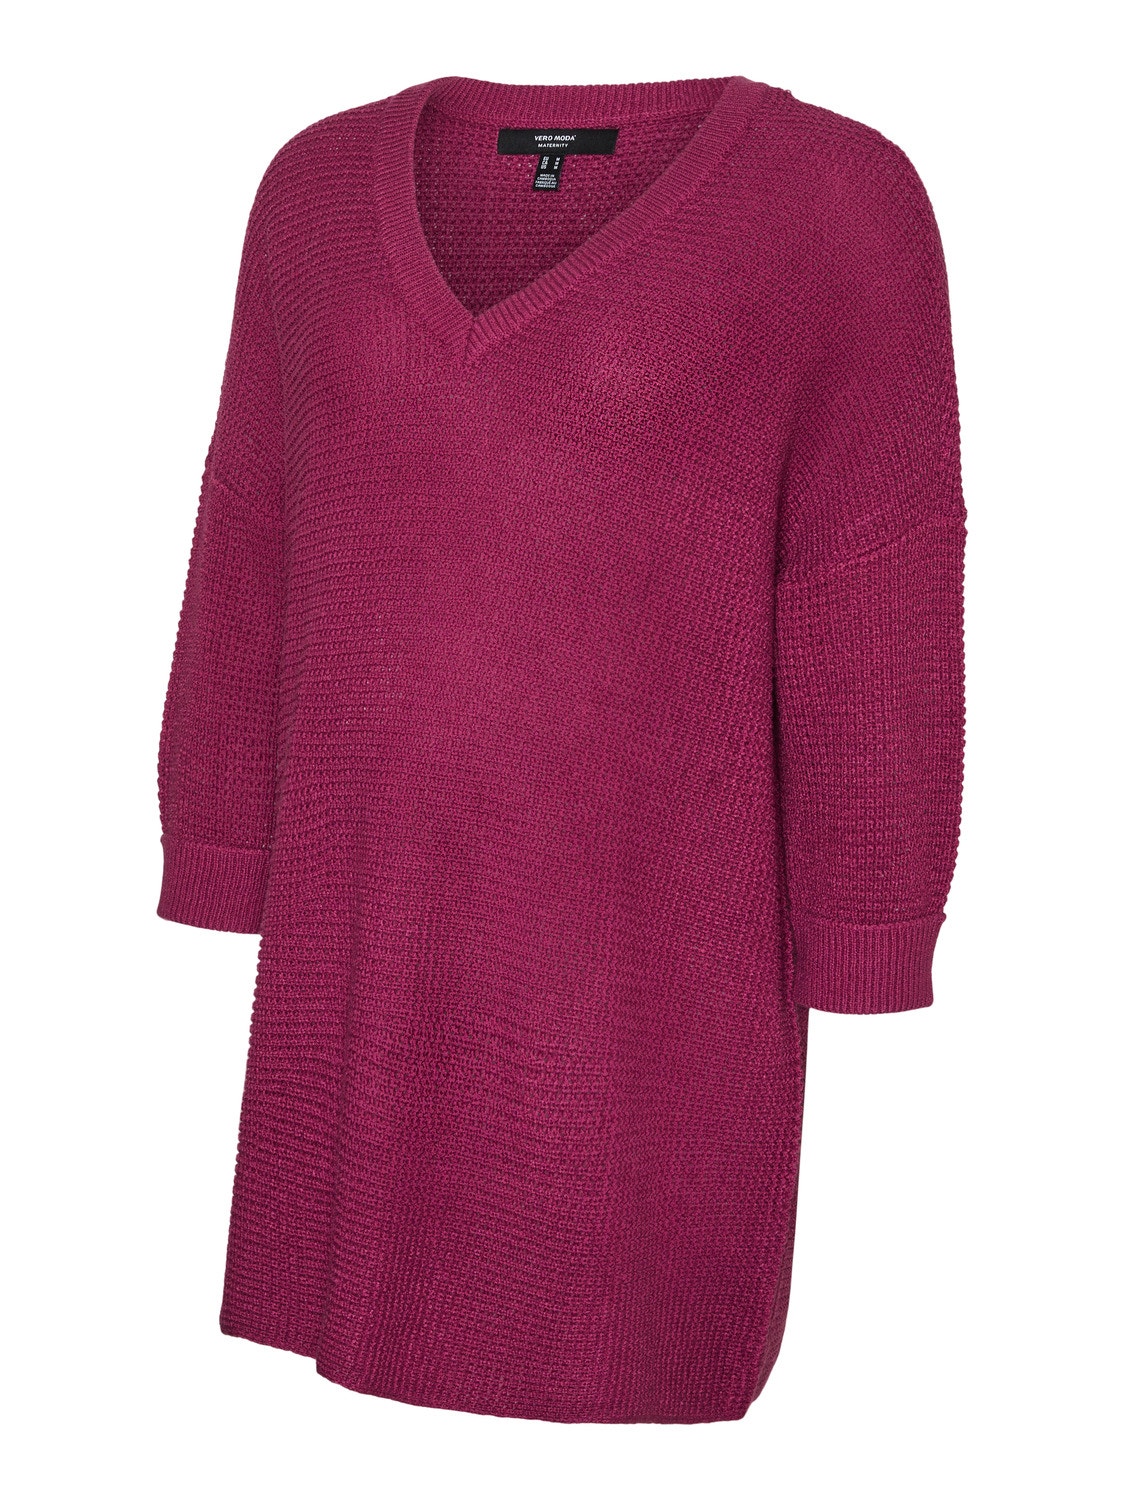 MAMA.LICIOUS PULL EN MAILLE -Boysenberry - 20019703